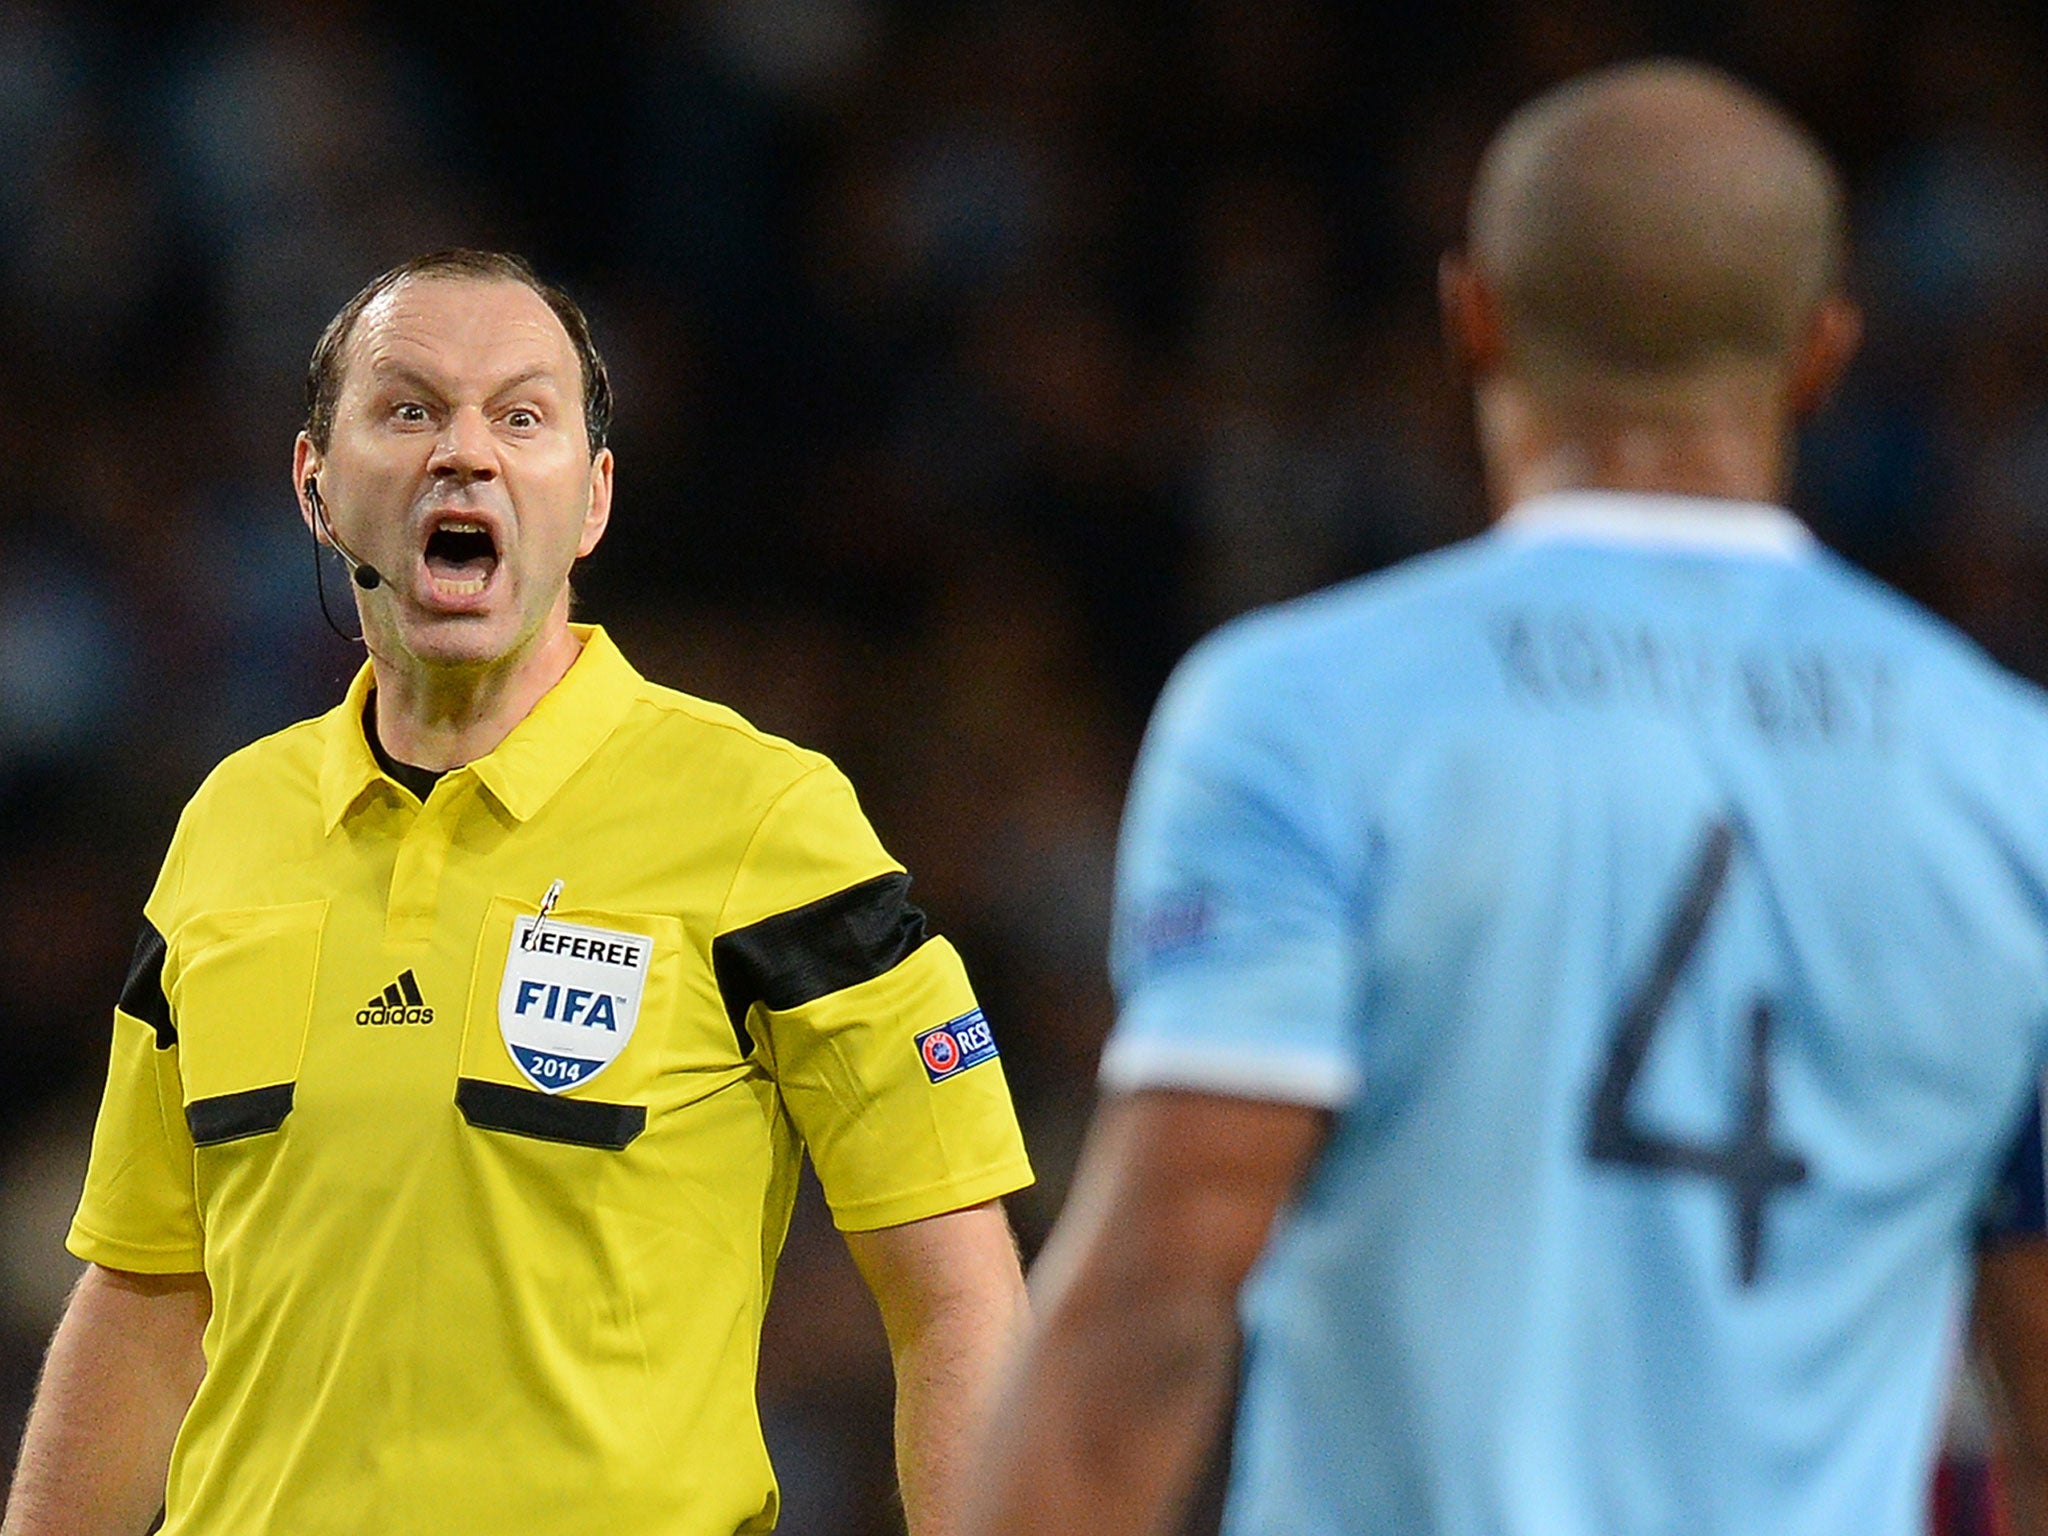 Jonas Eriksson’s decision to send off Demichelis changed the game but it was the correct call